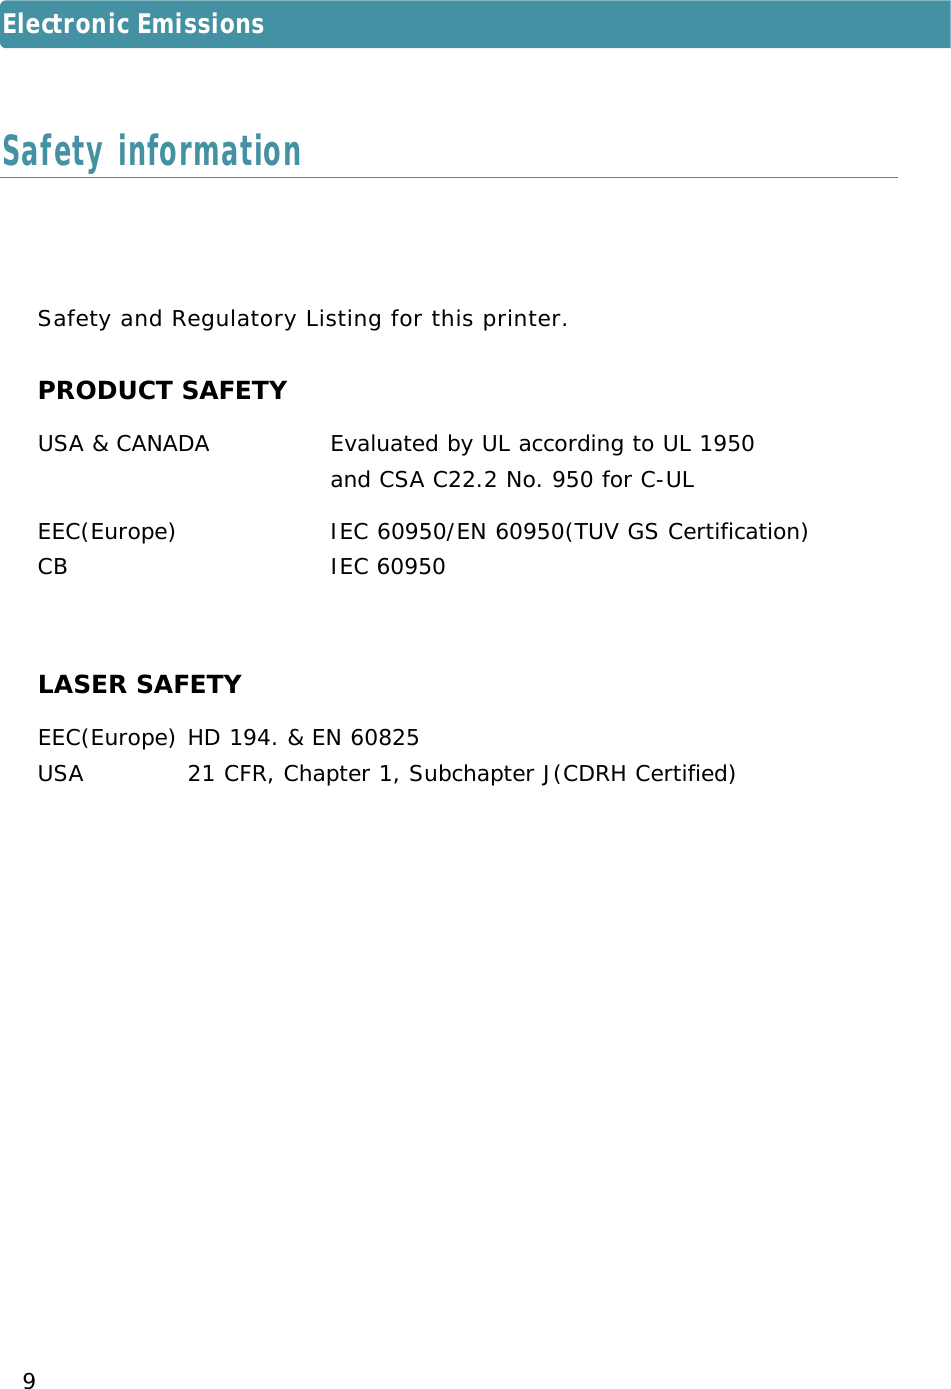 9S a f e ty and Regulatory Listing for this printer.PRODUCT SAFETYUSA &amp; CANADA   Evaluated by UL according to UL 1950and CSA C22.2 No. 950 for C-ULEEC(Europe)   IEC 60950/EN 60950(TUV GS Certification)CB IEC 60950LASER SAFETYEEC(Europe) HD 194. &amp; EN 60825USA 21 CFR, Chapter 1, Subchapter J(CDRH Certified)Safety informationElectronic Emissions